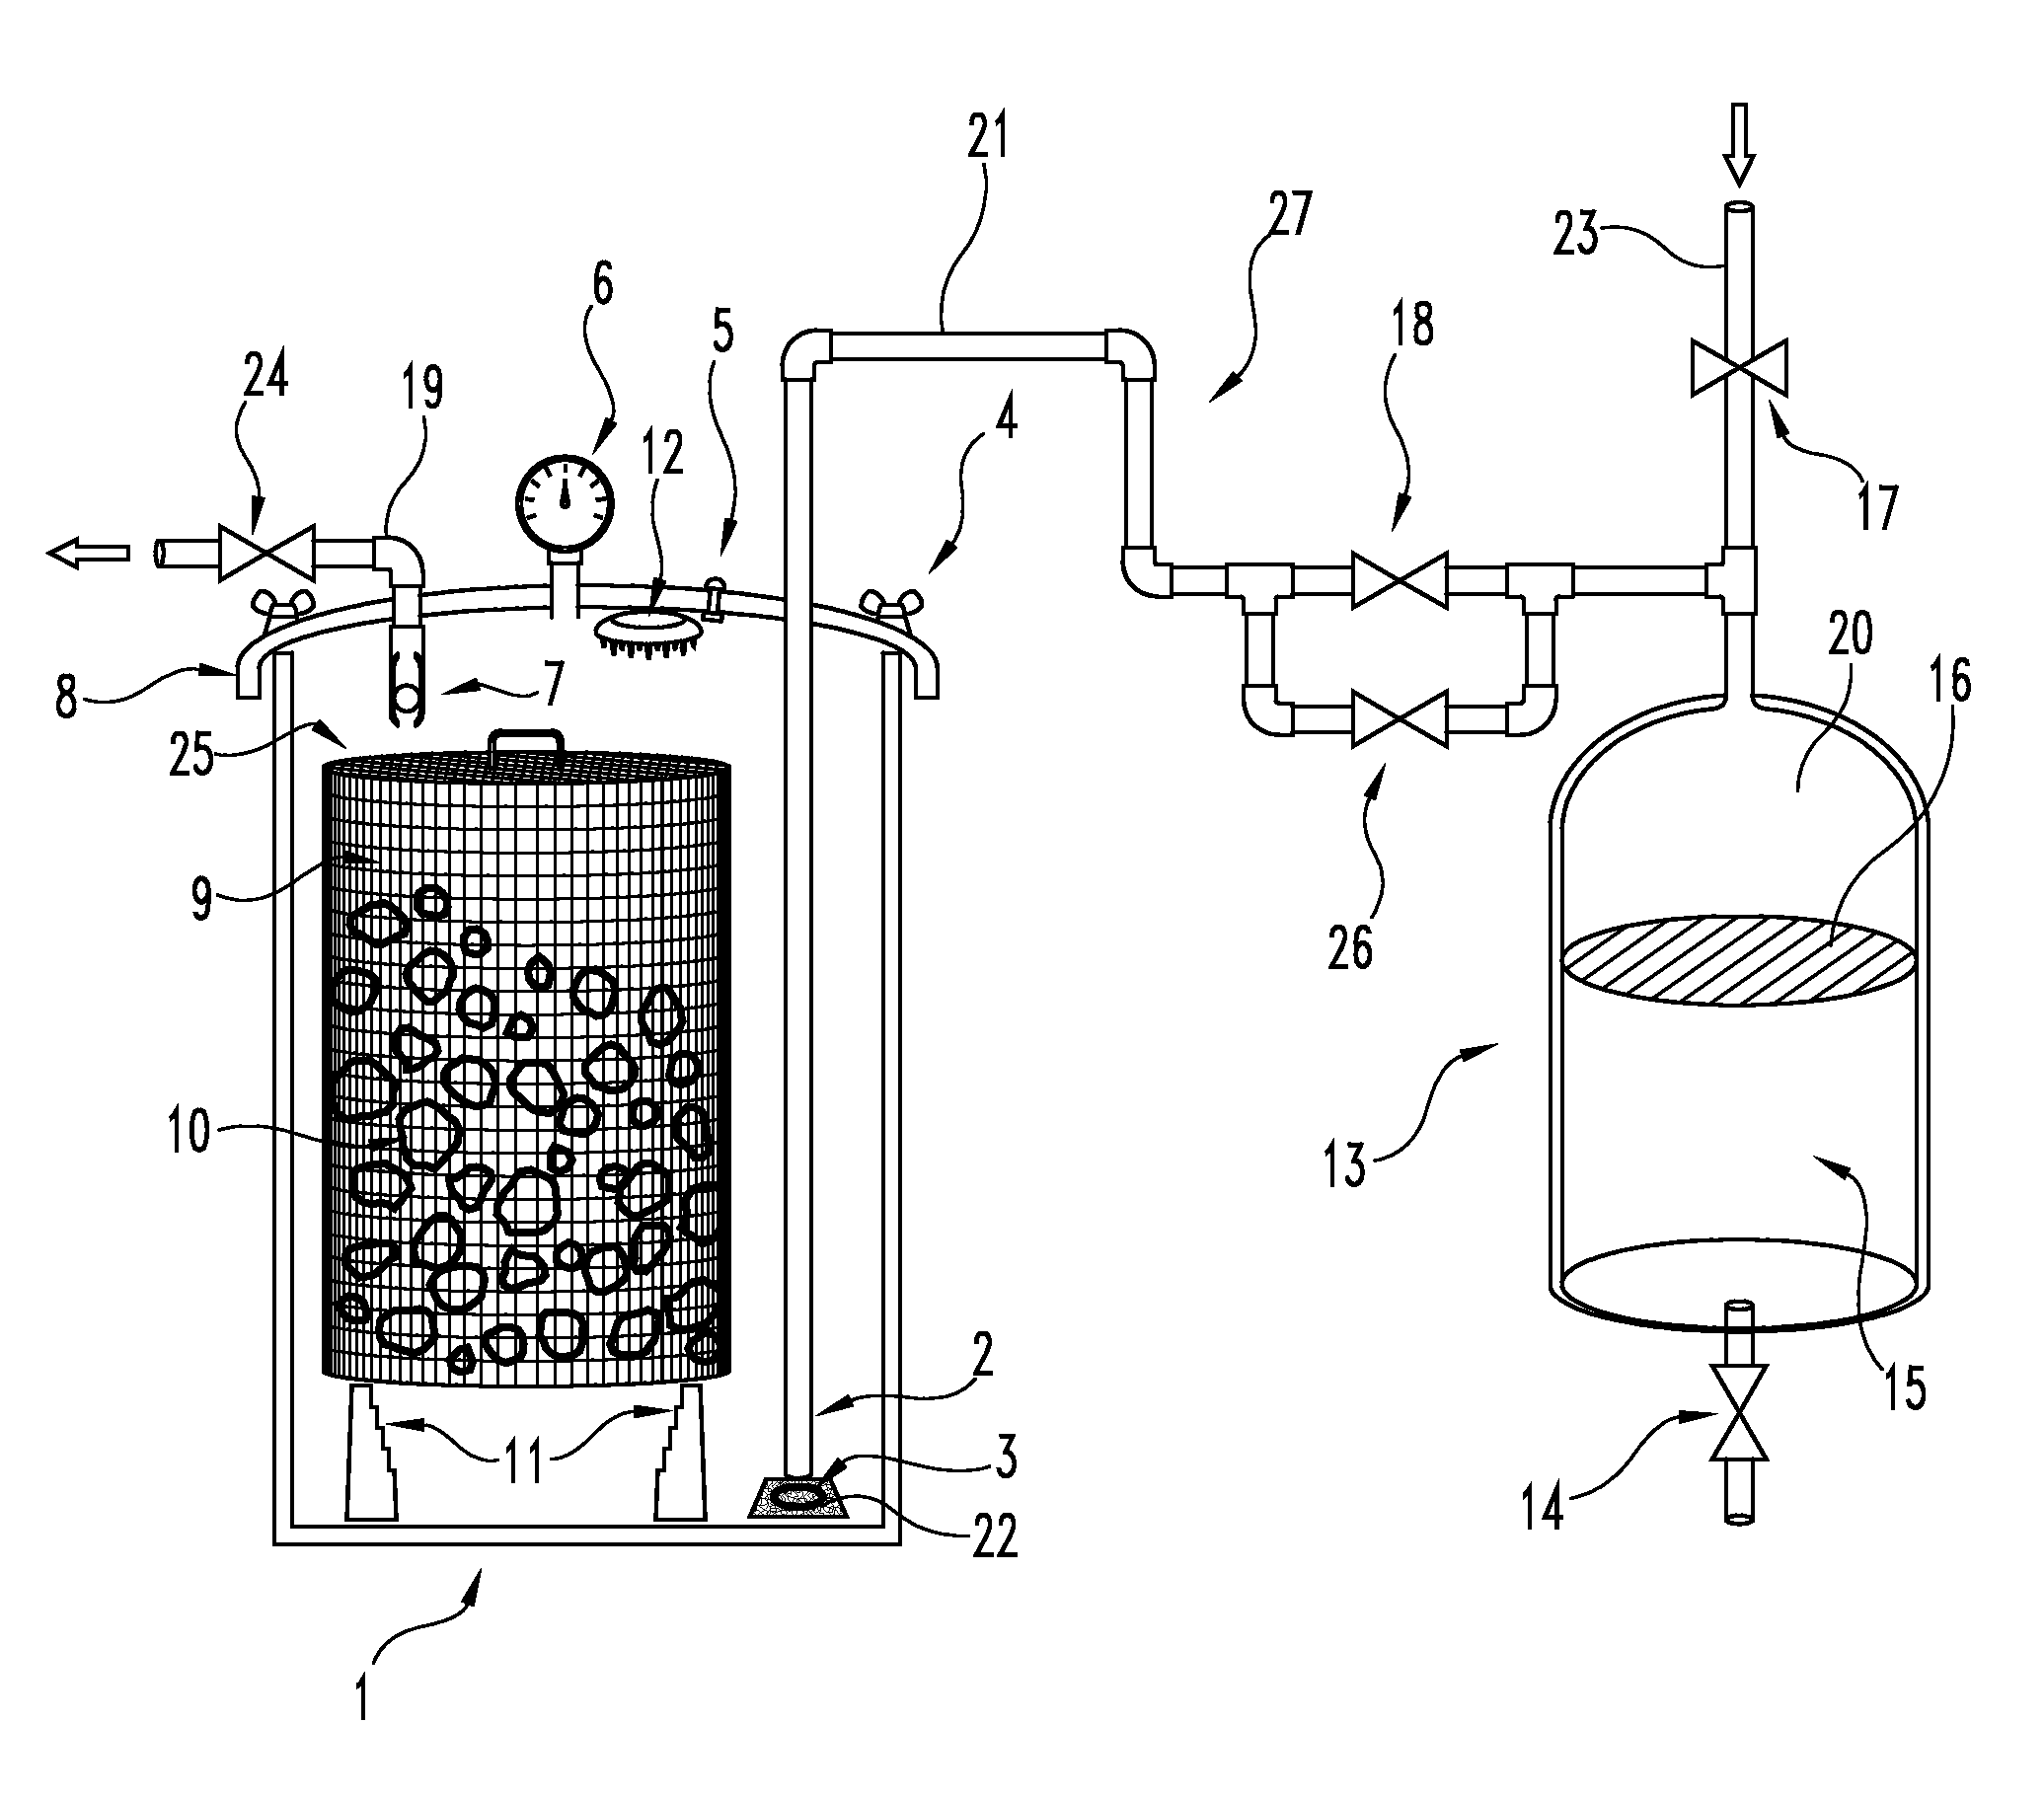 Control system for an on-demand gas generator